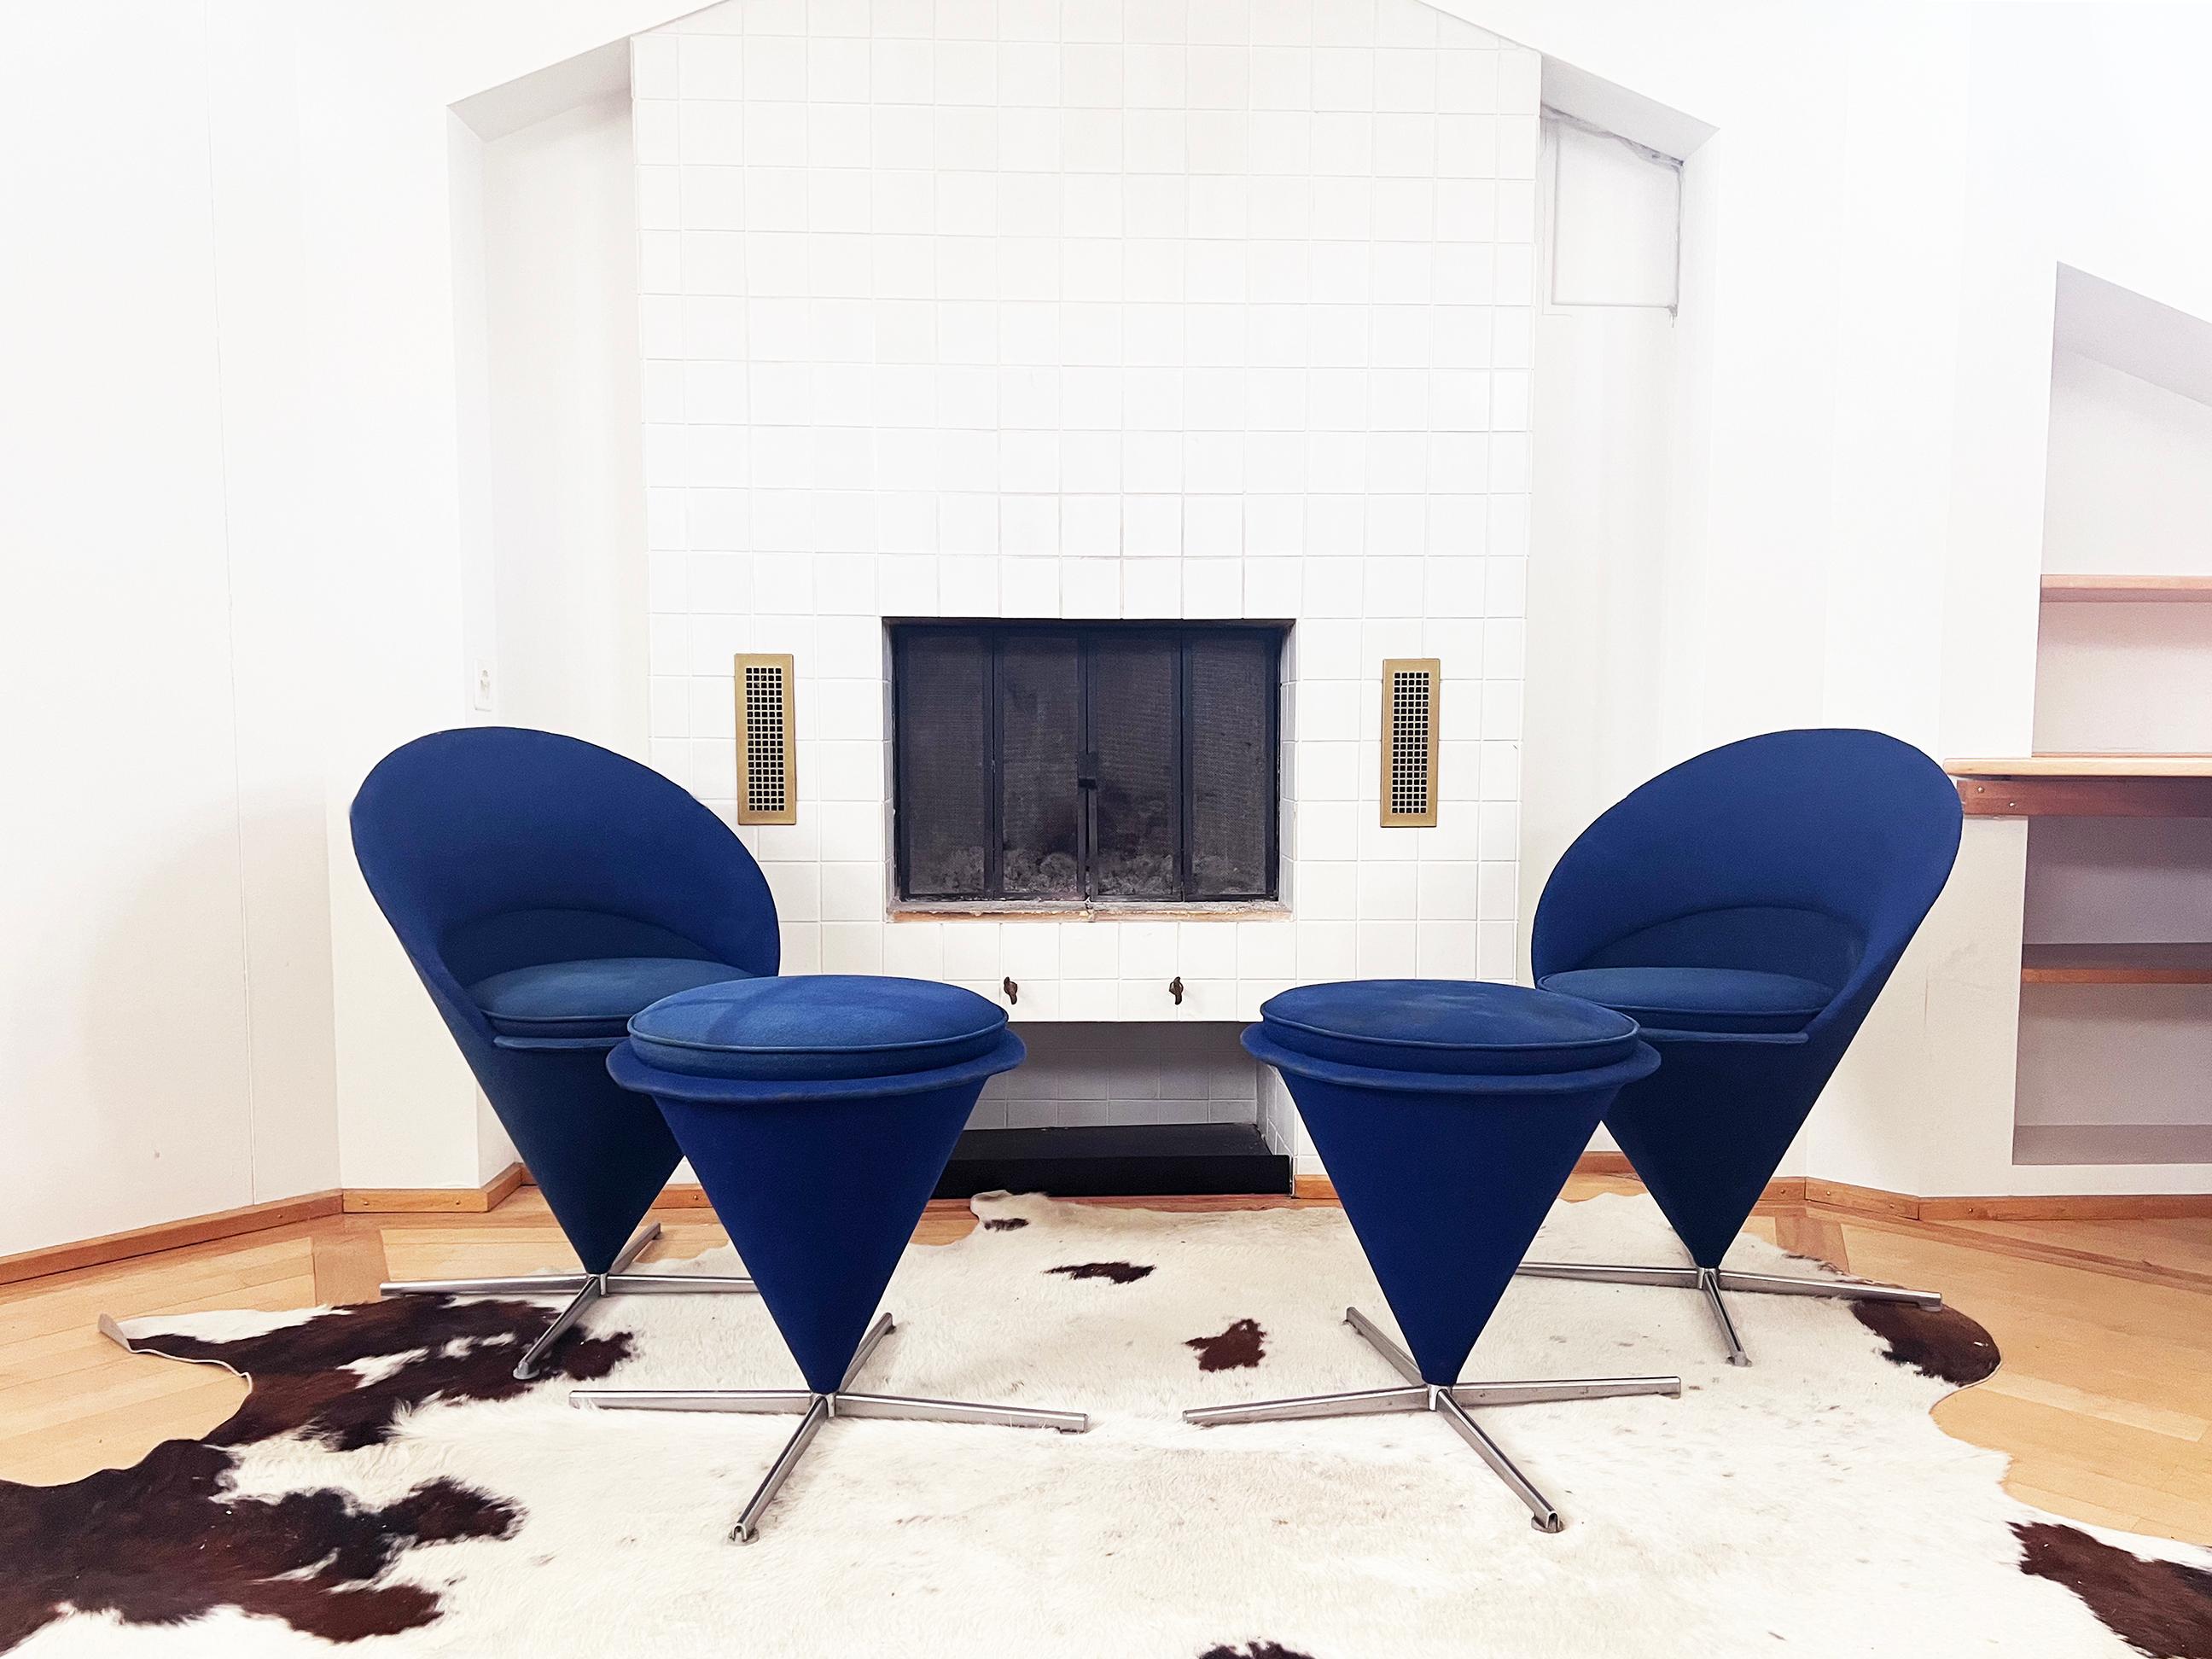 Original Verner Panton Cone Chair and Ottoman, produced by Vitra.  Beautiful set.

This is the iconic Verner Panton chair in the shape of a cone, upholstered in blue wool and featuring a swivel four-pass steel base with round acrylic feet. The model